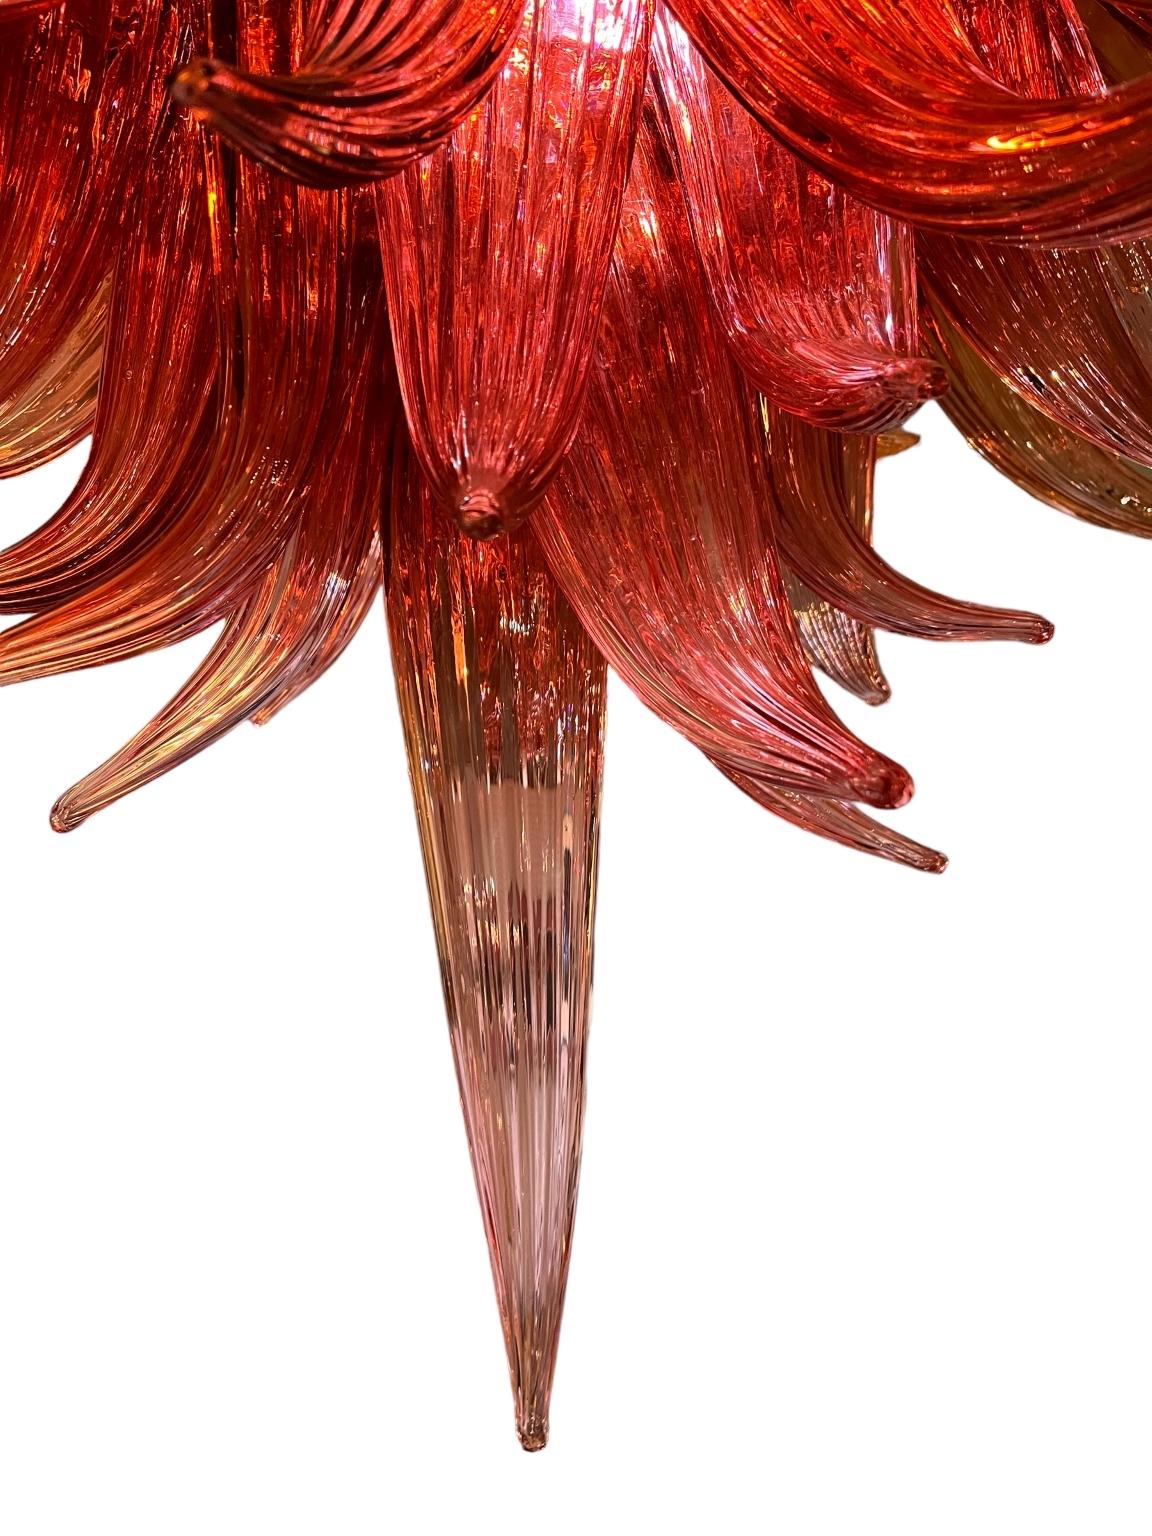 Mid-Century Modern Modern Hand Blown Studio Glass Chandelier in the Manner of Dale Chihuly